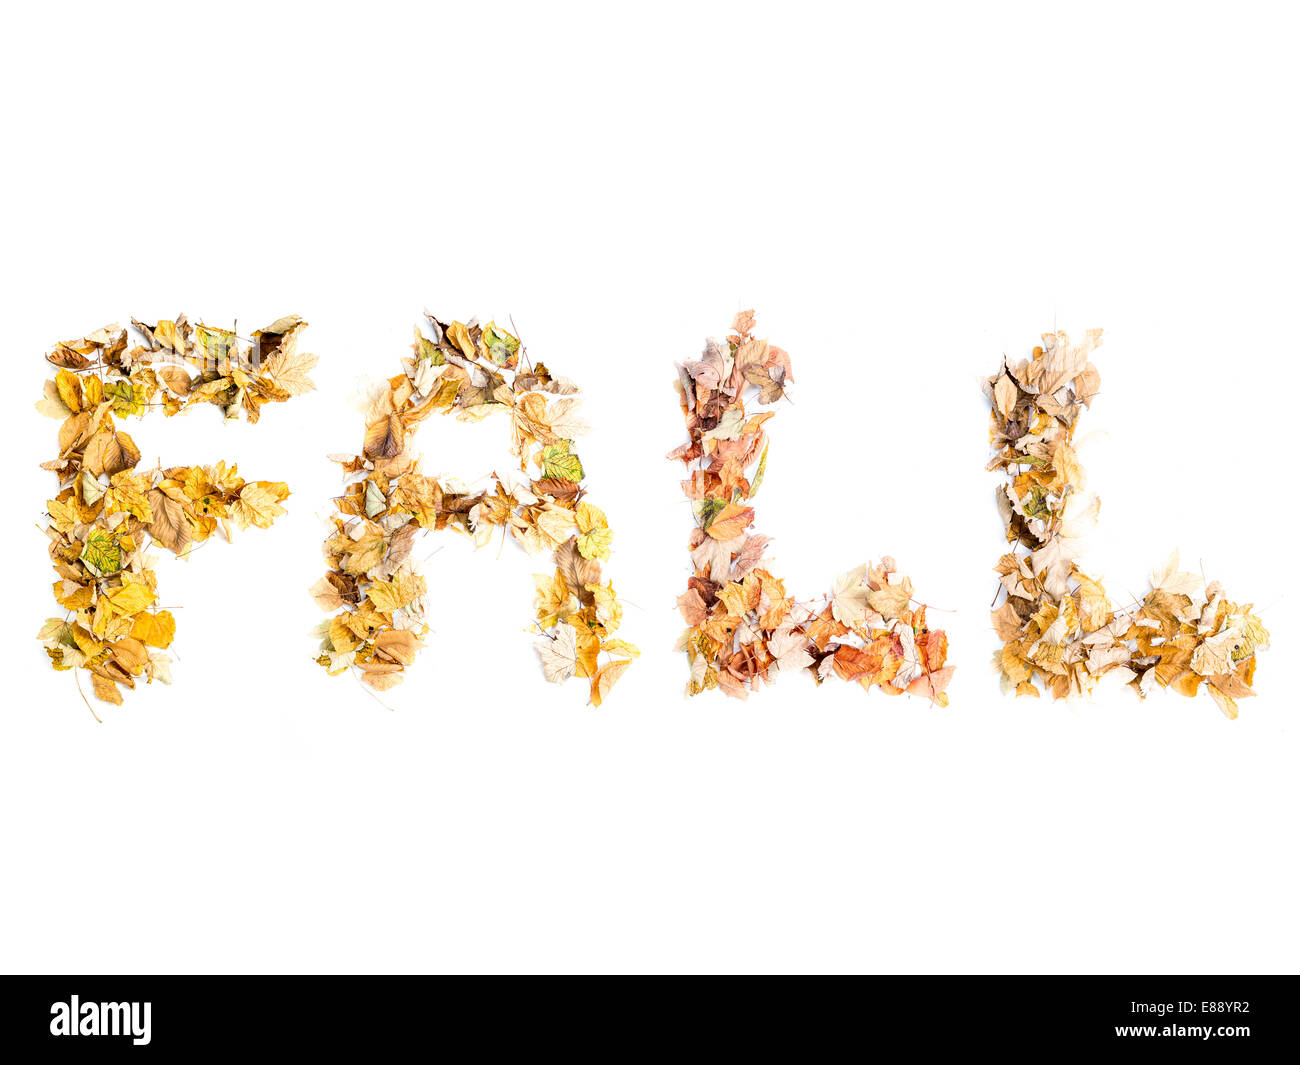 Fall word composed of various dead leaves over white background Stock Photo